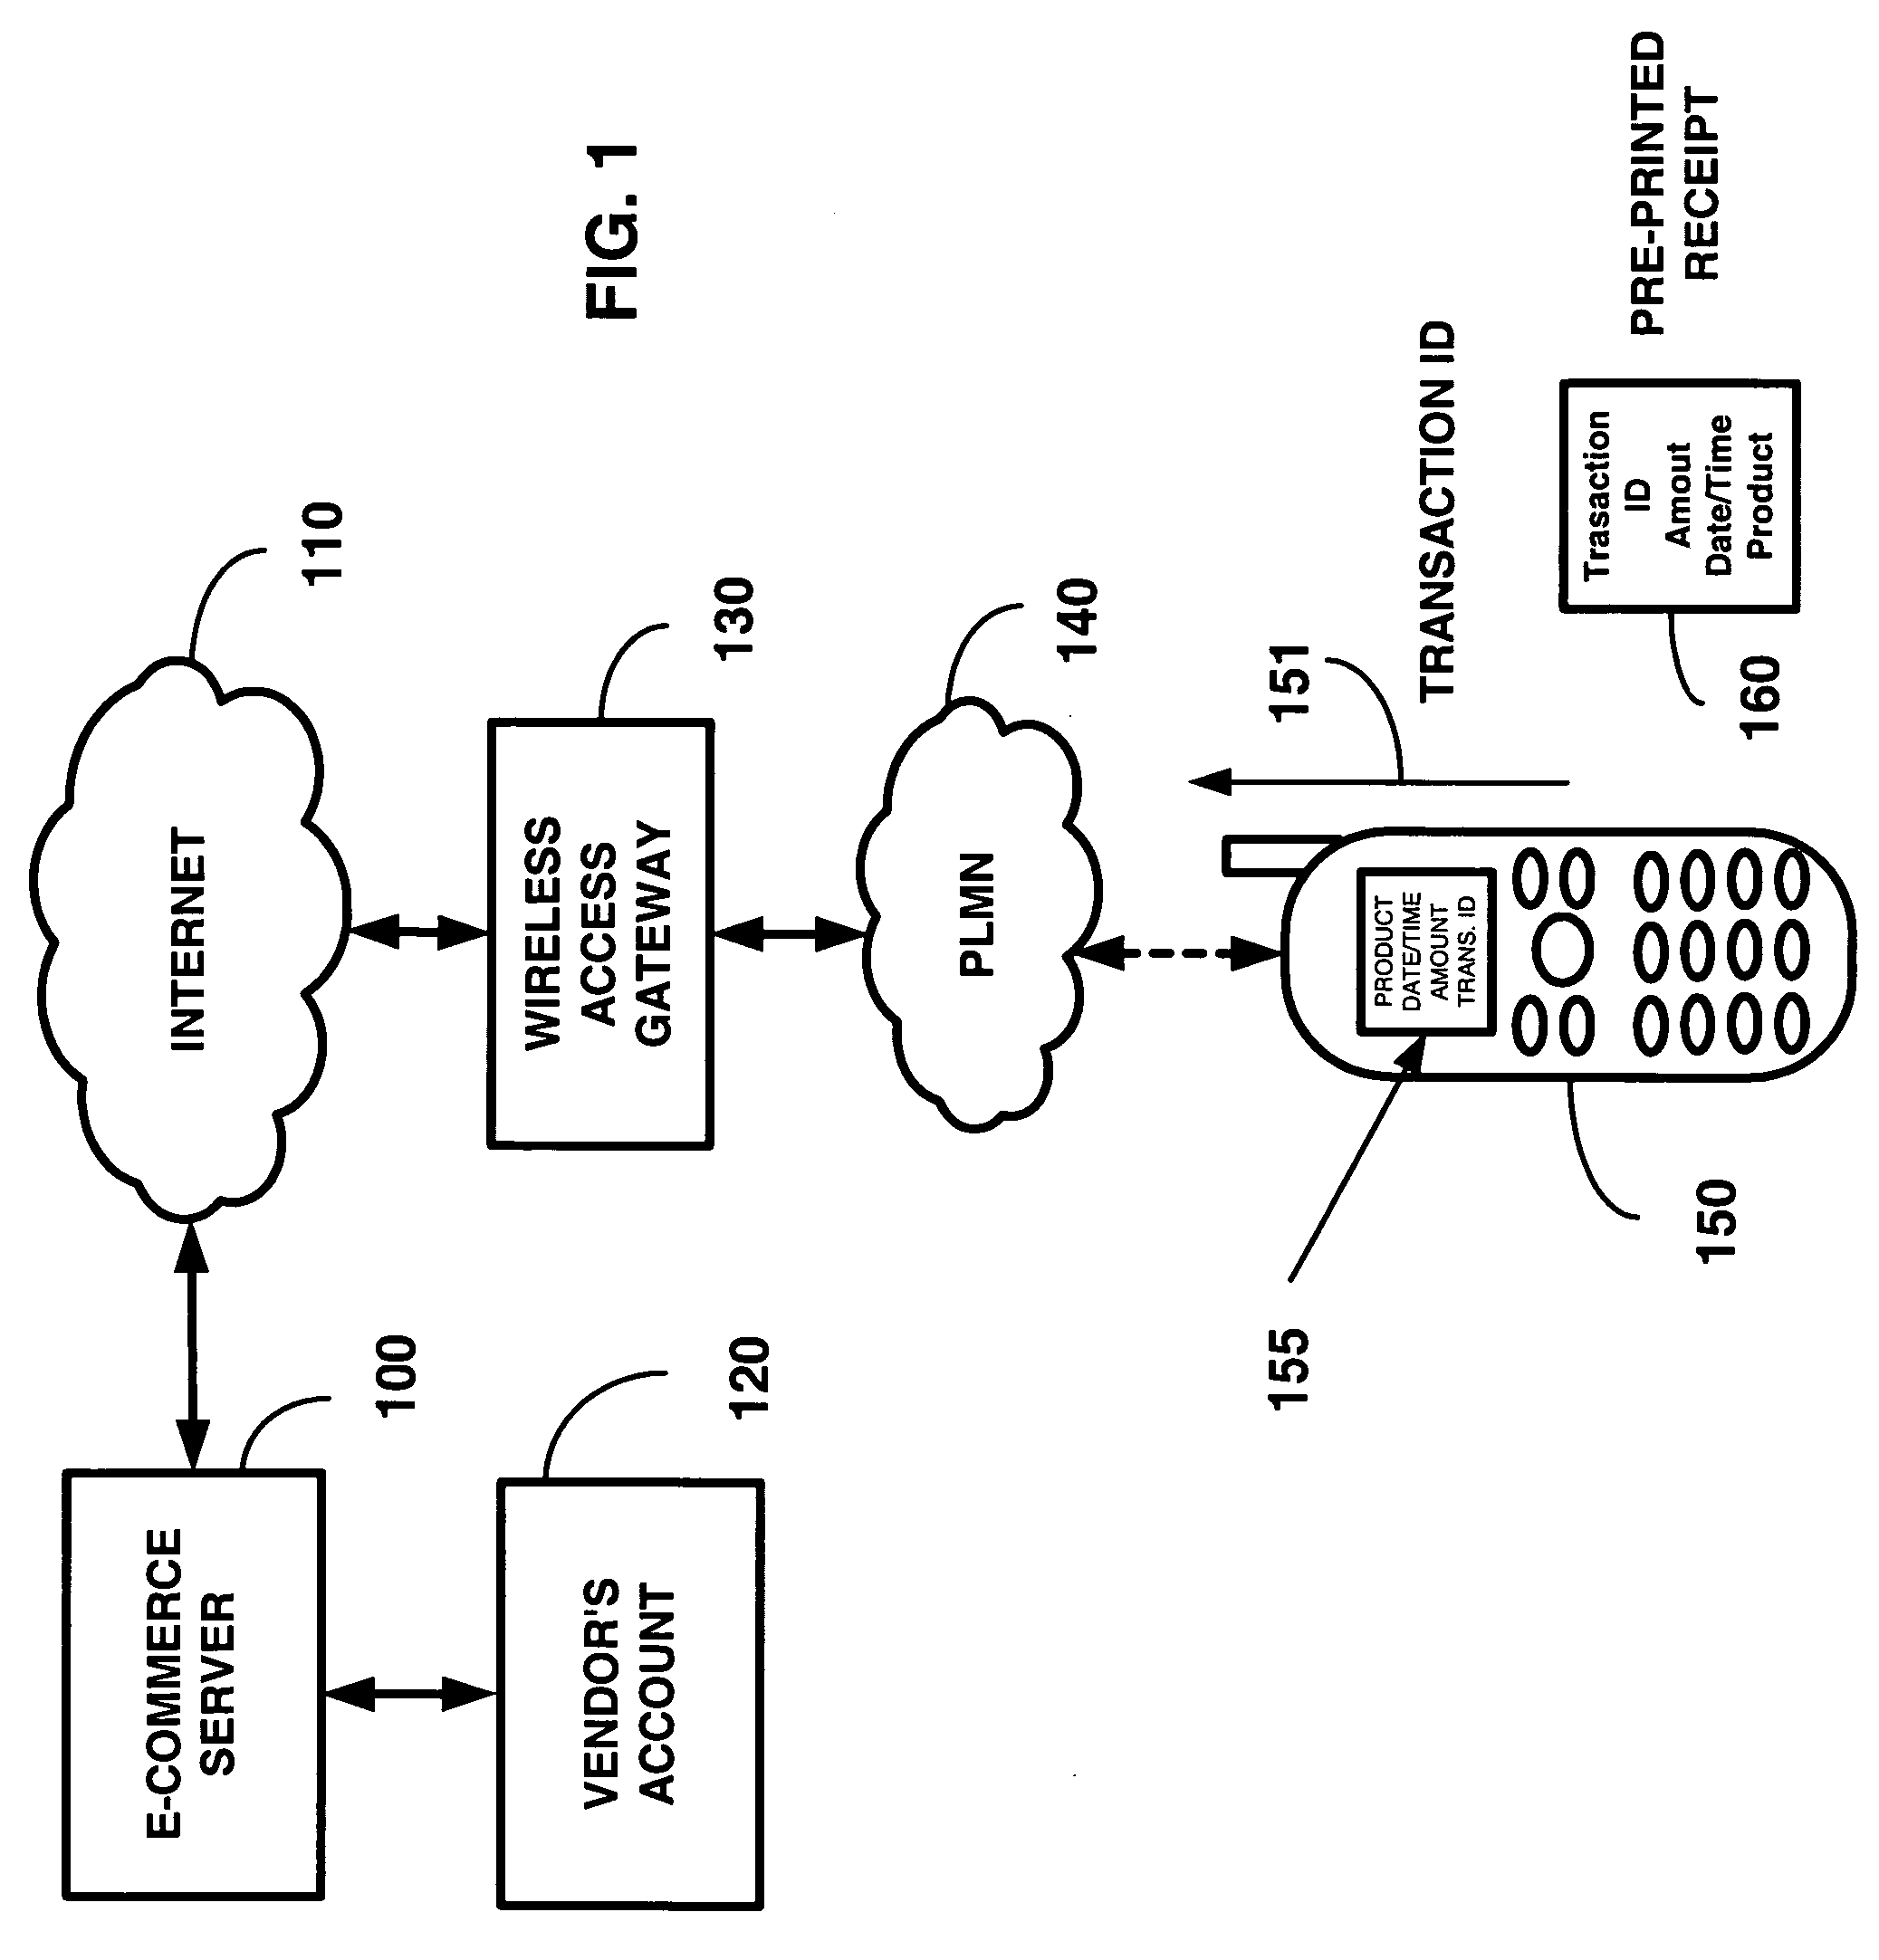 Method of confirming transactions through mobile wireless devices during reselling and distribution of products and services